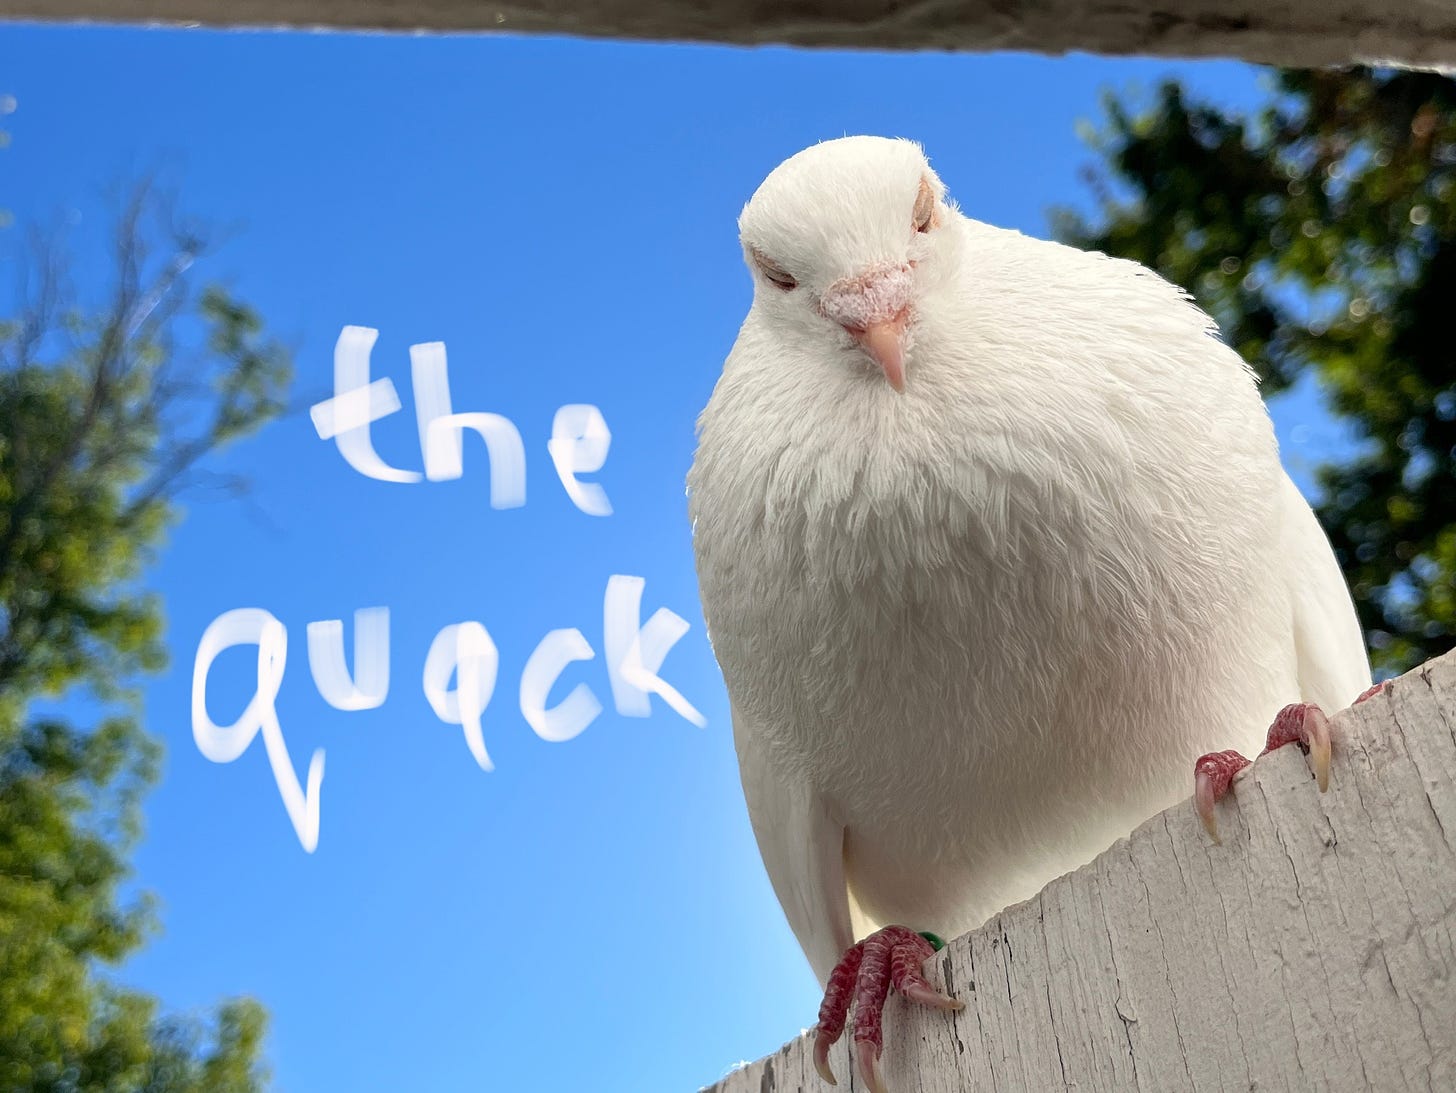 A white pigeon gazes down from the top of a doorway with white whispy letter spelling out "the quack" over a bright blue sky